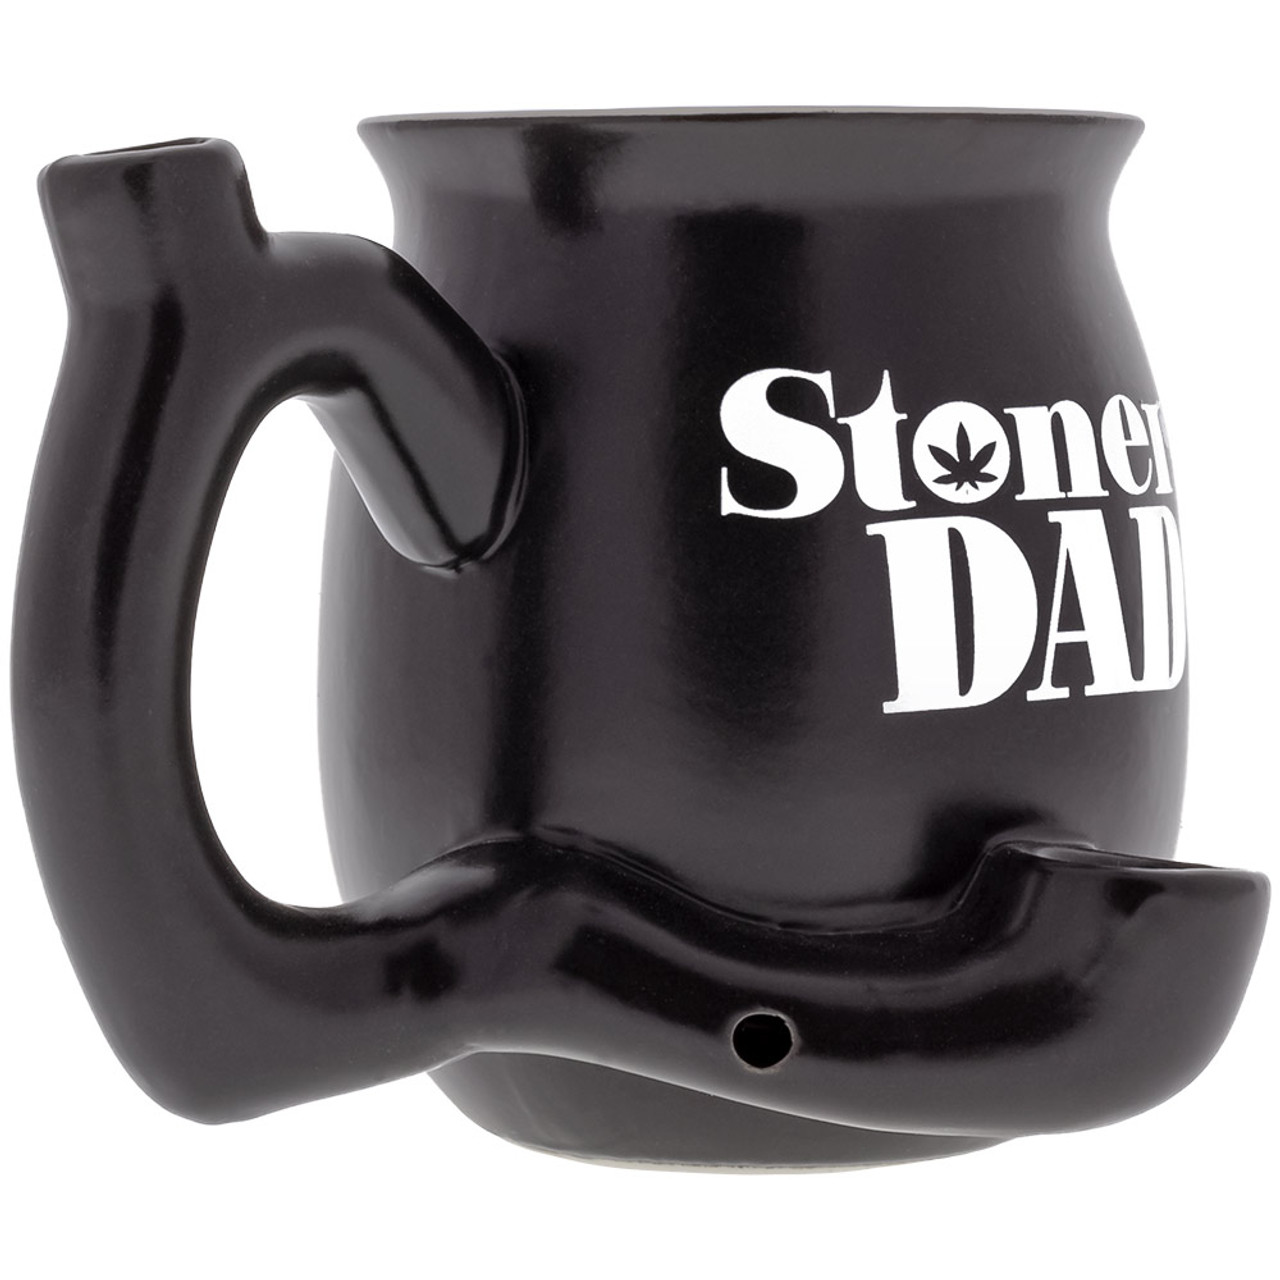 Coffee Mug Pipe Ceramic Novelty Black Color Coffee With Built-in Pipe -  iTeeUS